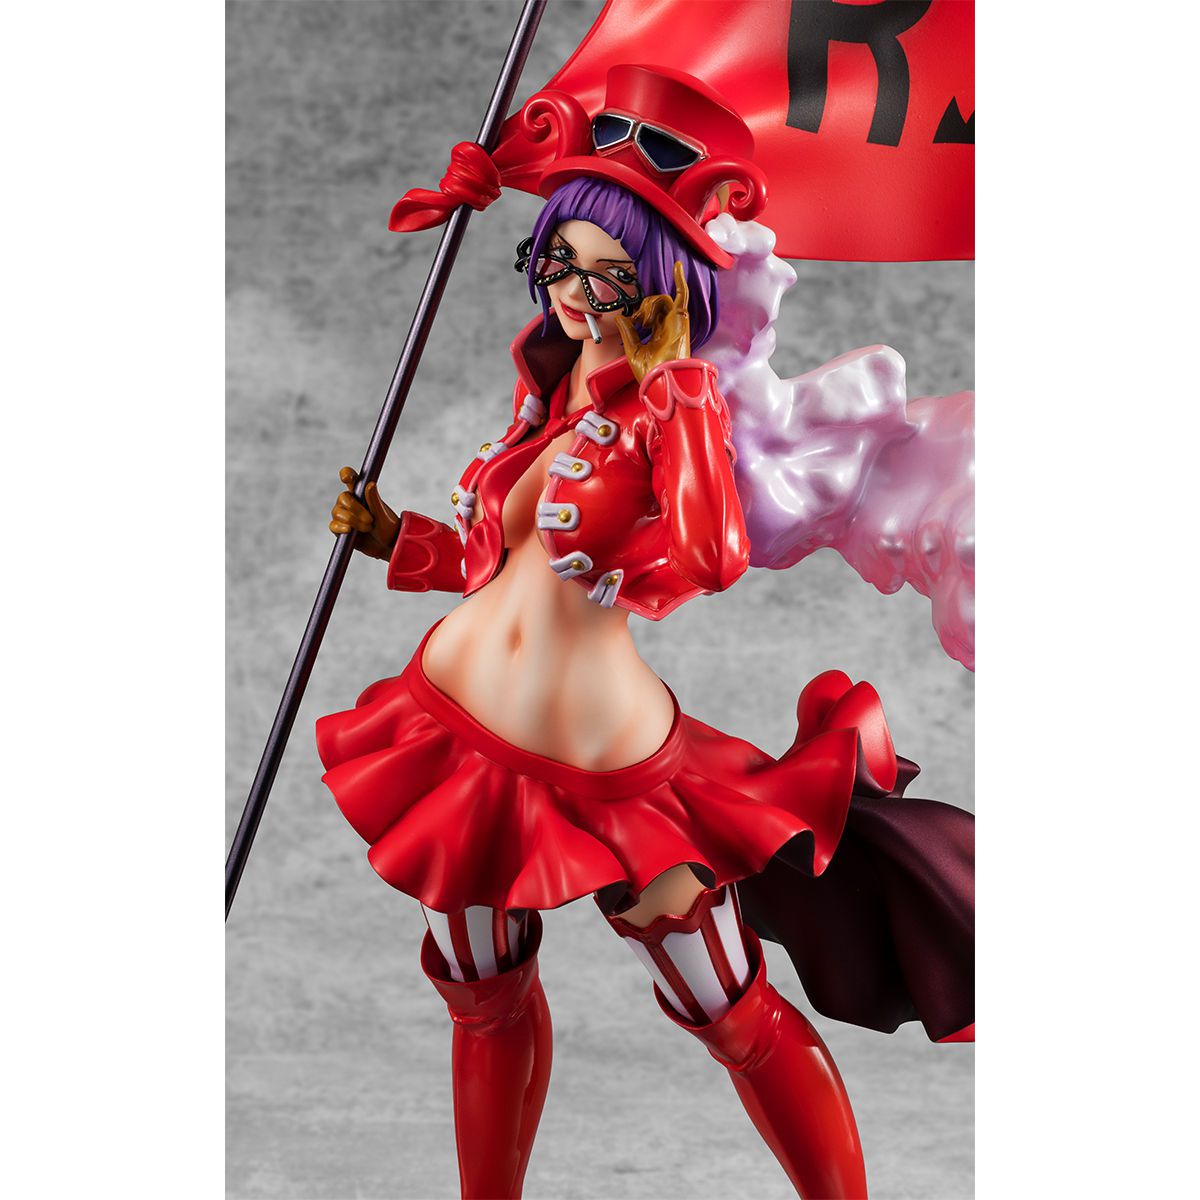 [Image] www price that too figure will be released is 16,830 yen 3